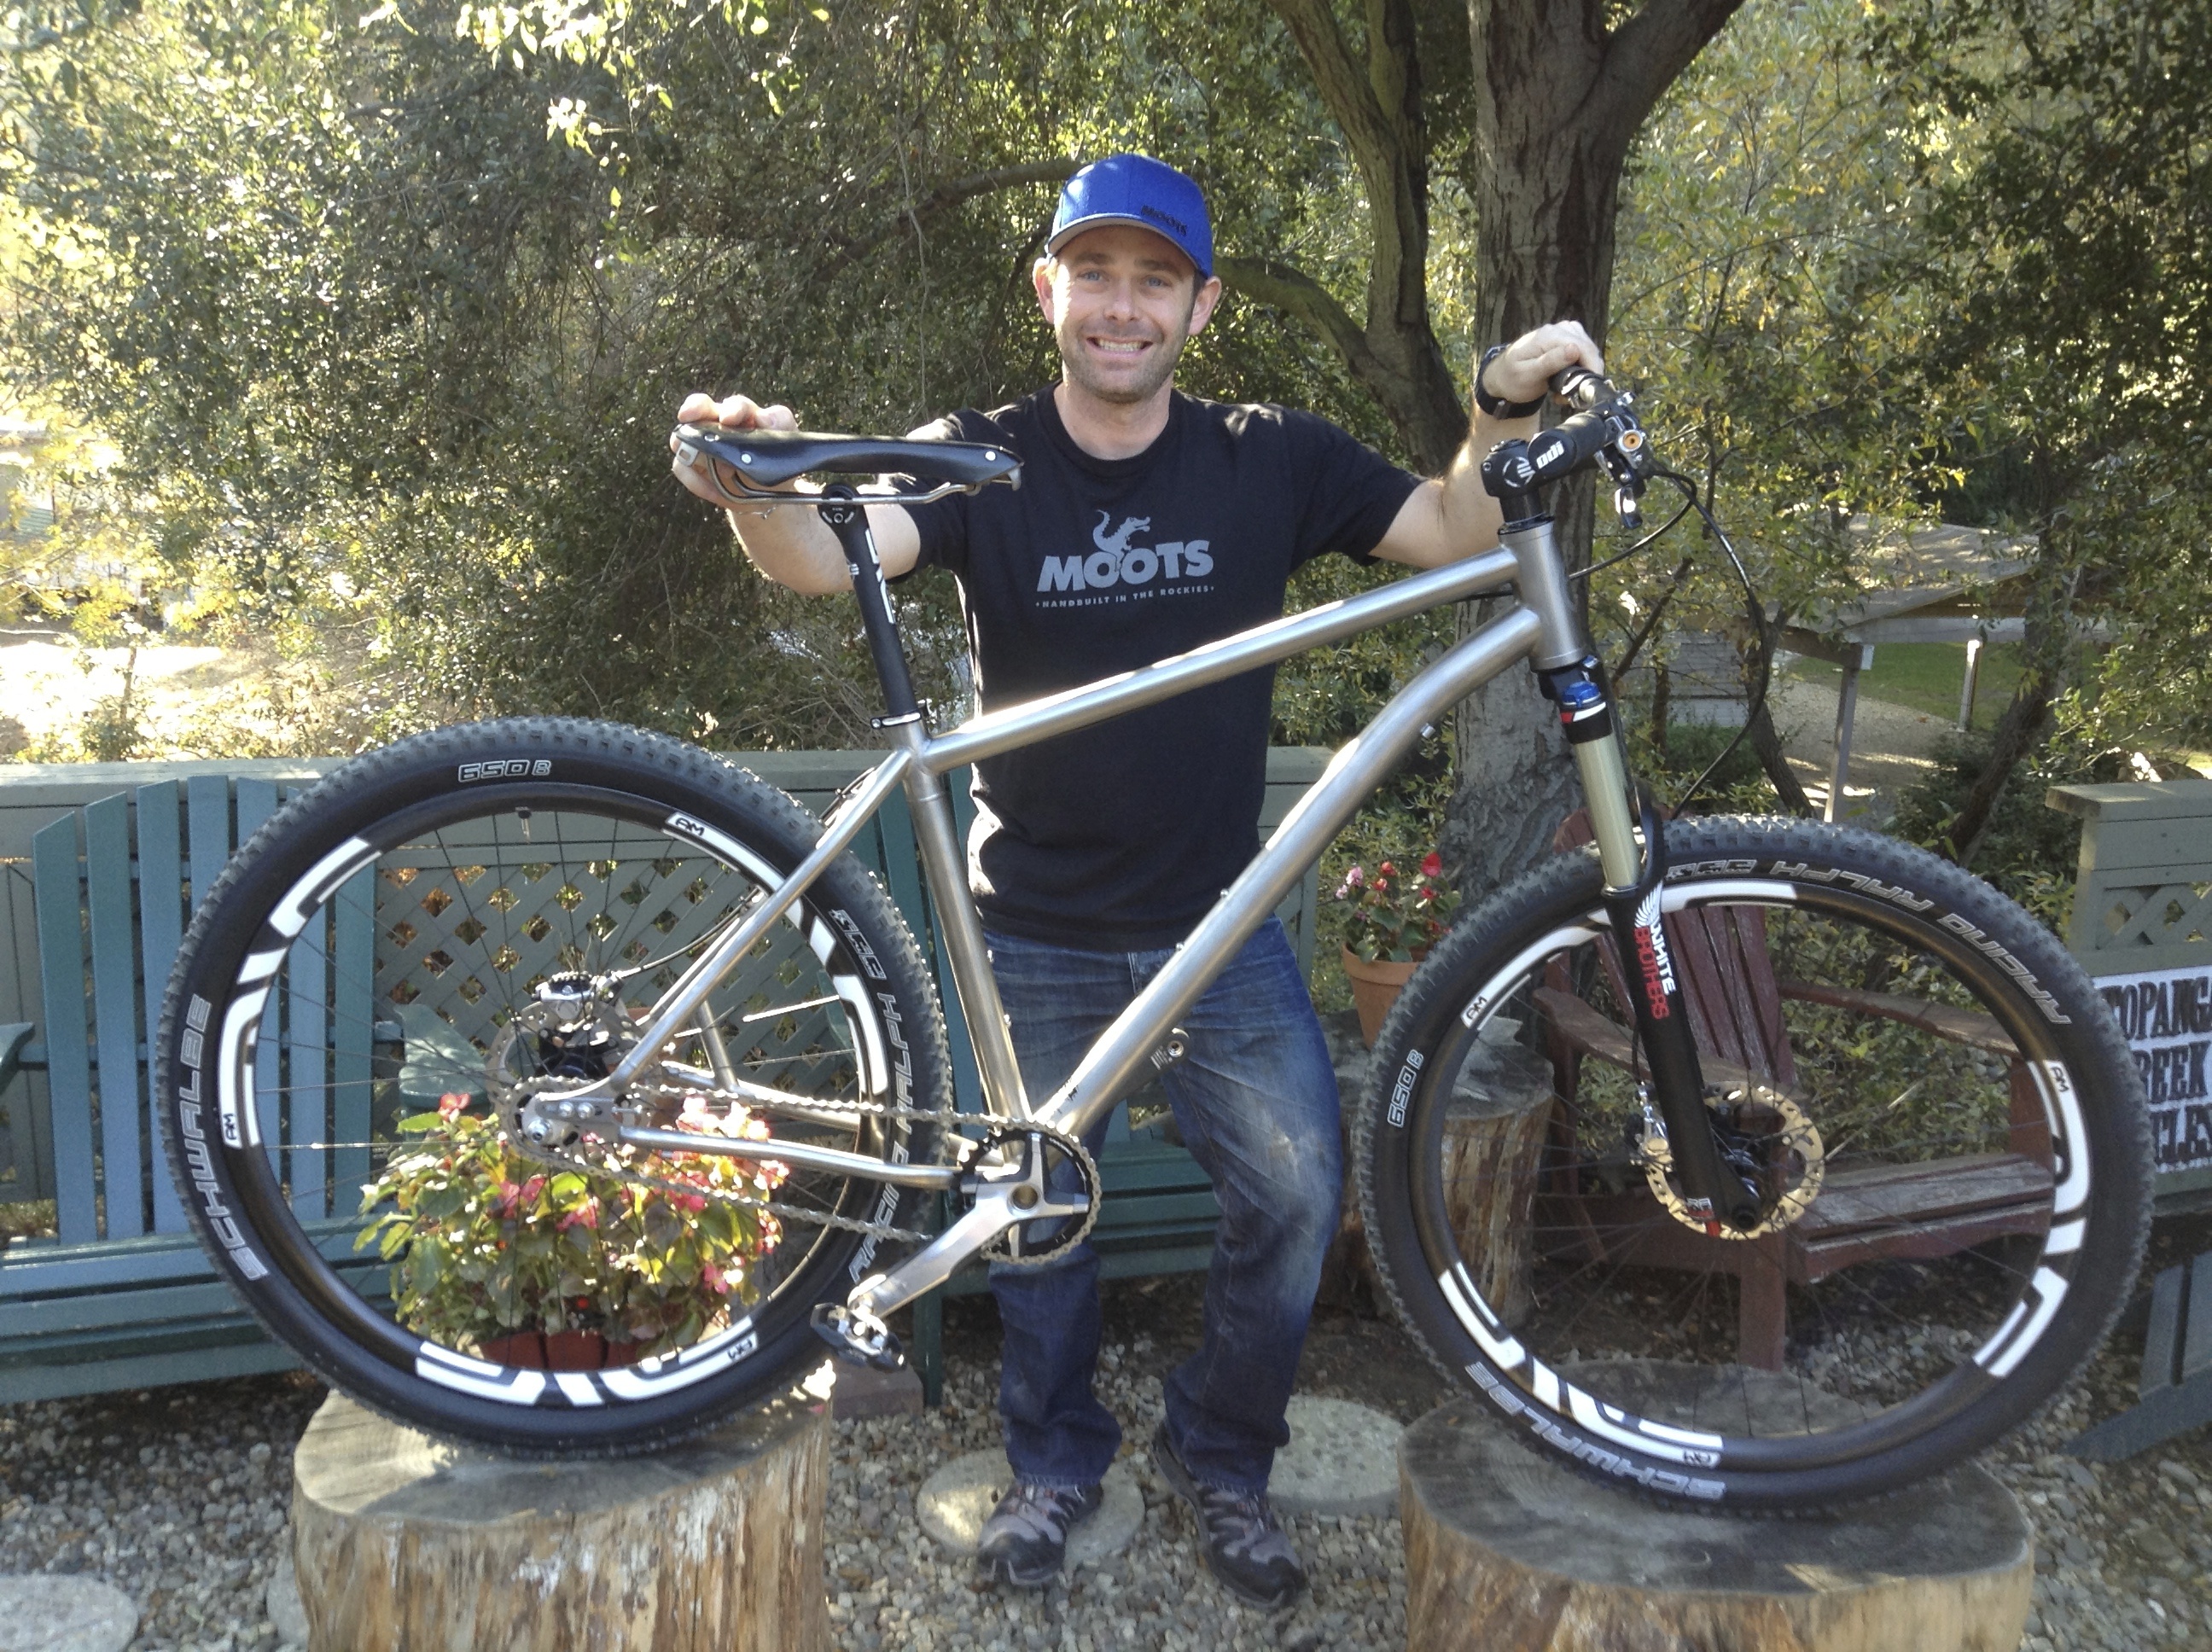 Robbie: the man, the myth, the legend. You've seen the countless pics of his Xaayy build that we've posted and you've seen his showpiece bike sitting around the shop but here he is in the flesh picking up his new SS Xaayy 650b titanium wq/ full ENVE and XTR- go ride that thing!